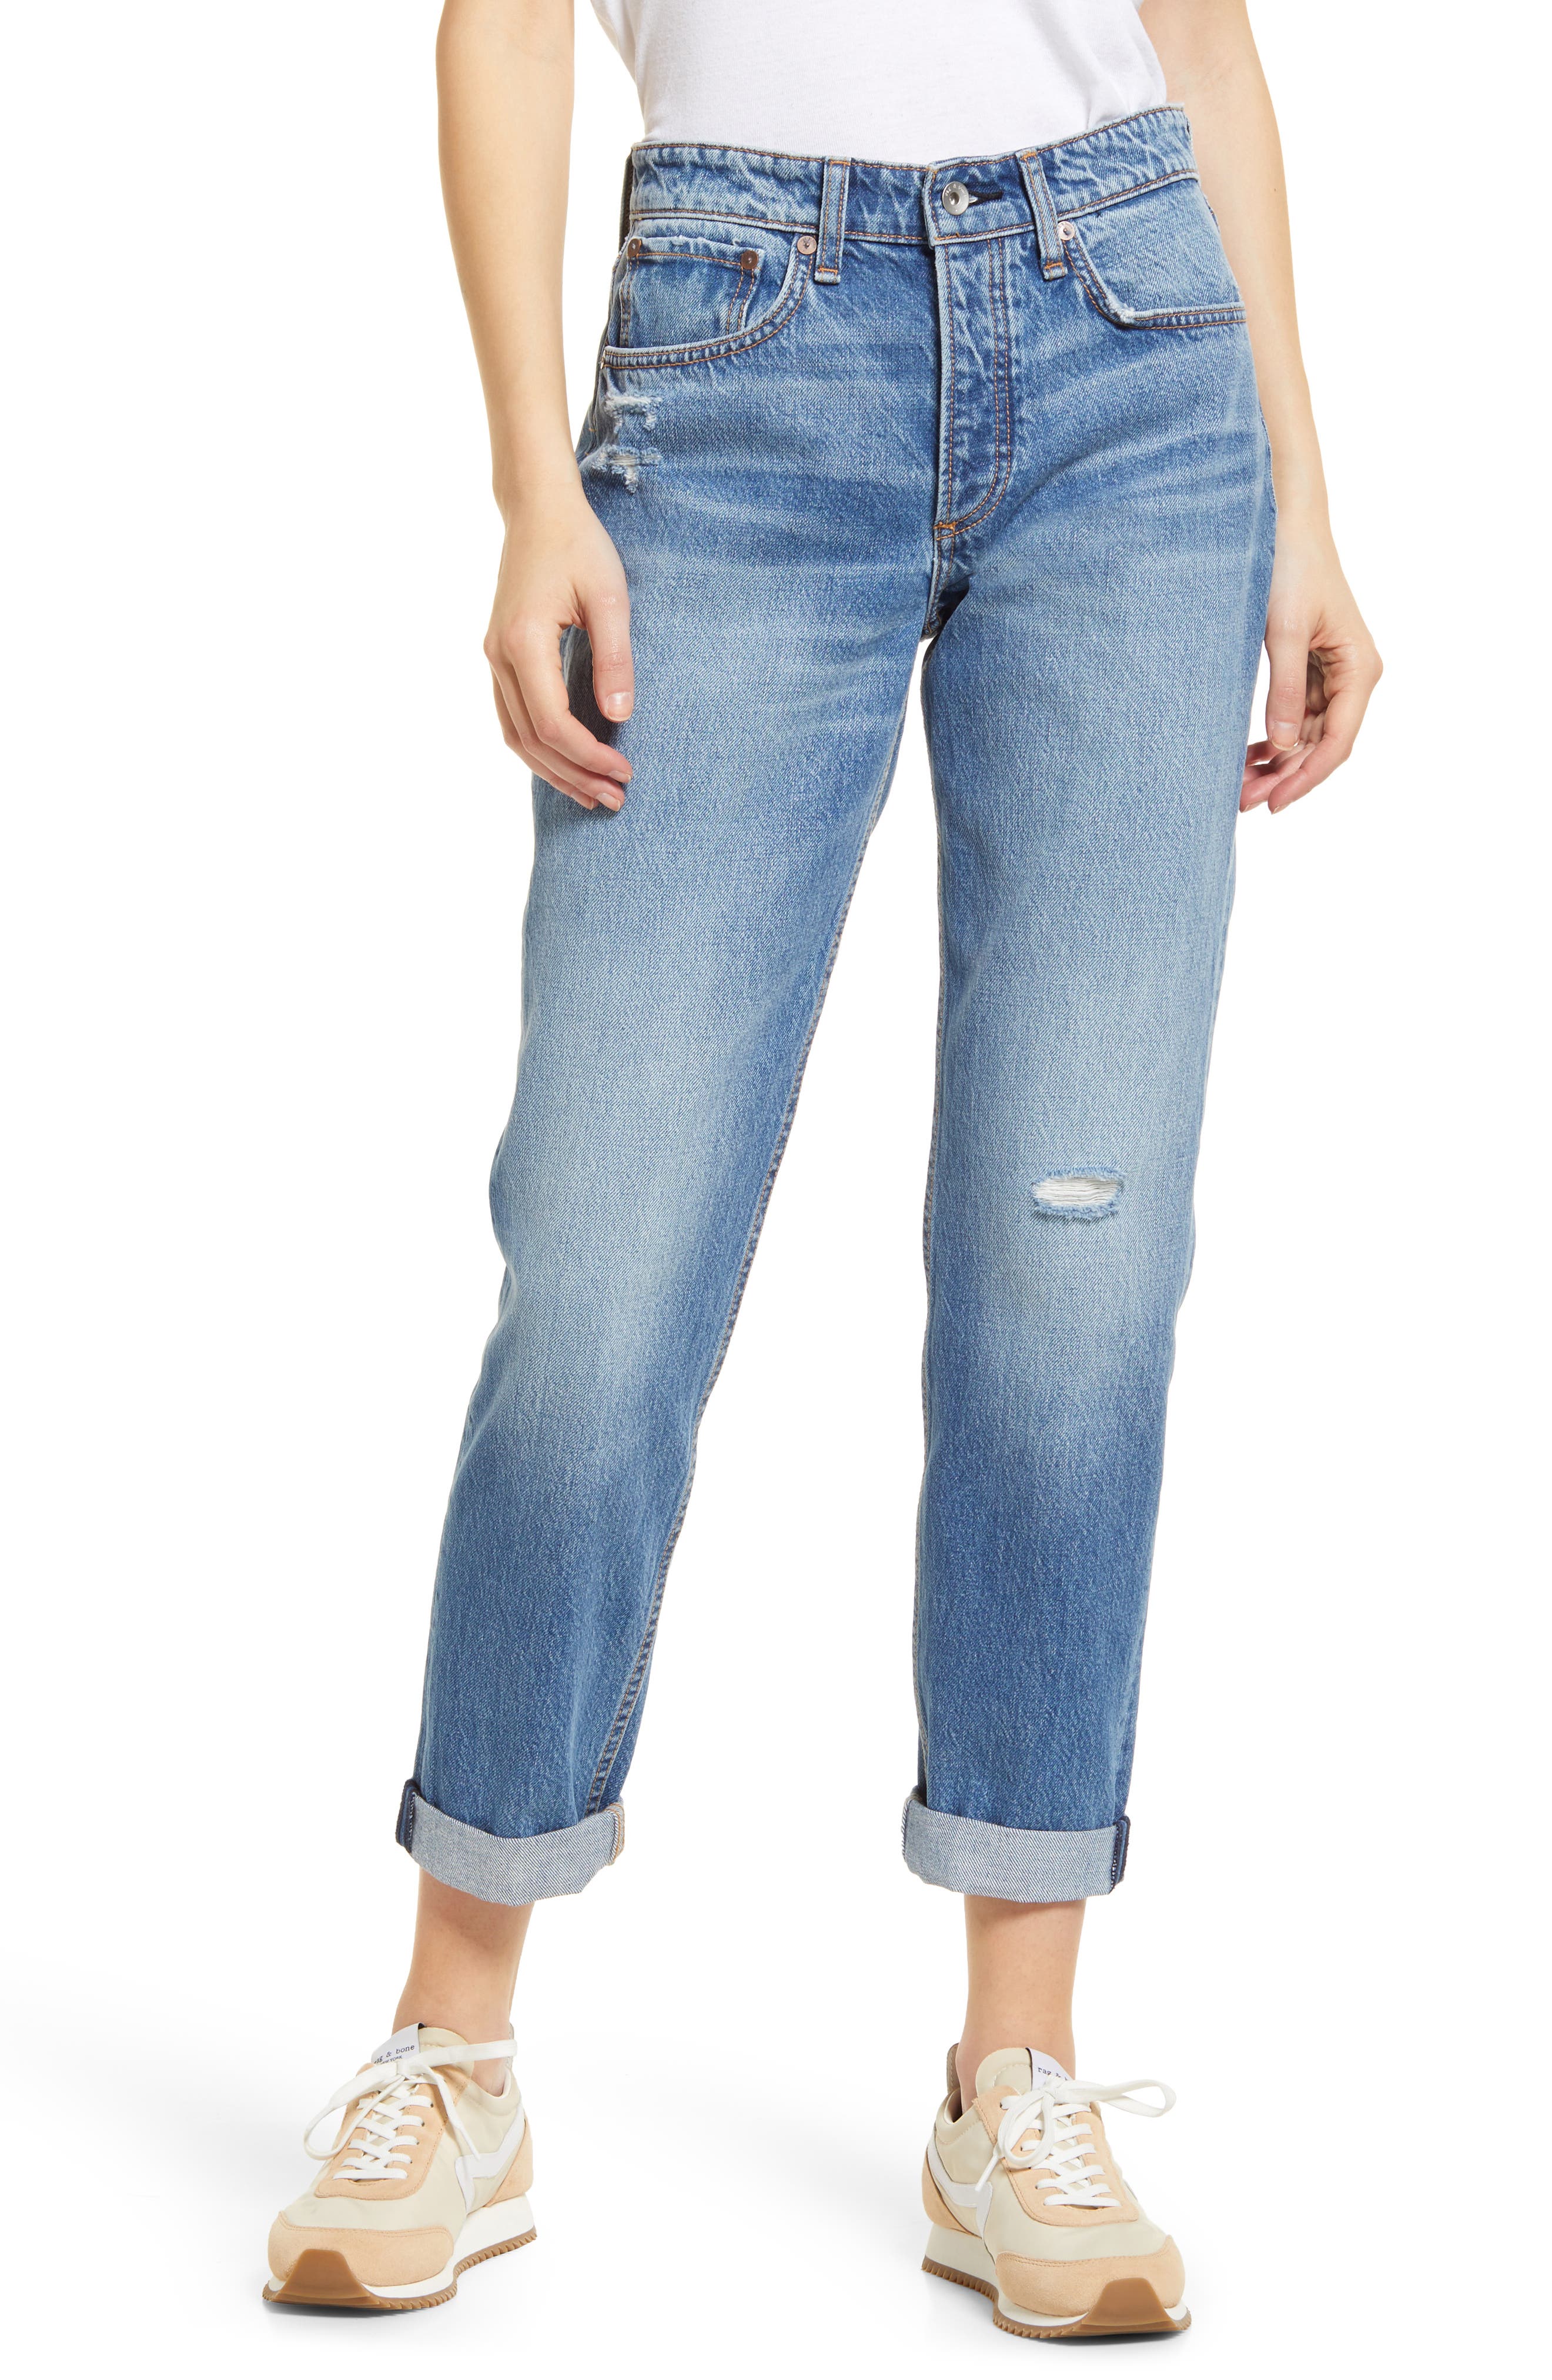 rag & bone Rosa Distressed Boyfriend Jeans in Peonywho at Nordstrom, Size 25